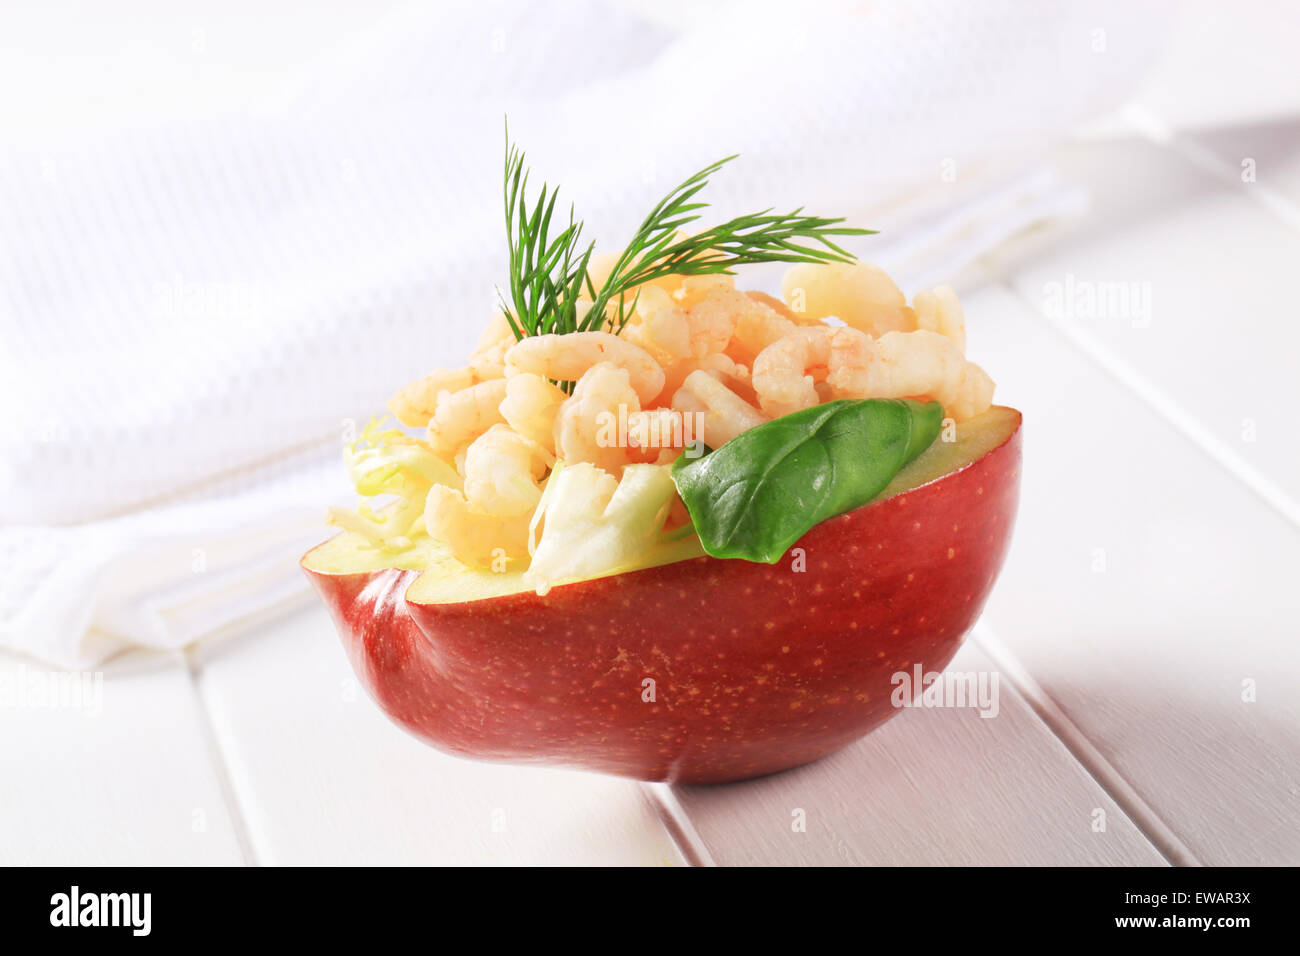 Half apple topped with shrimps Stock Photo